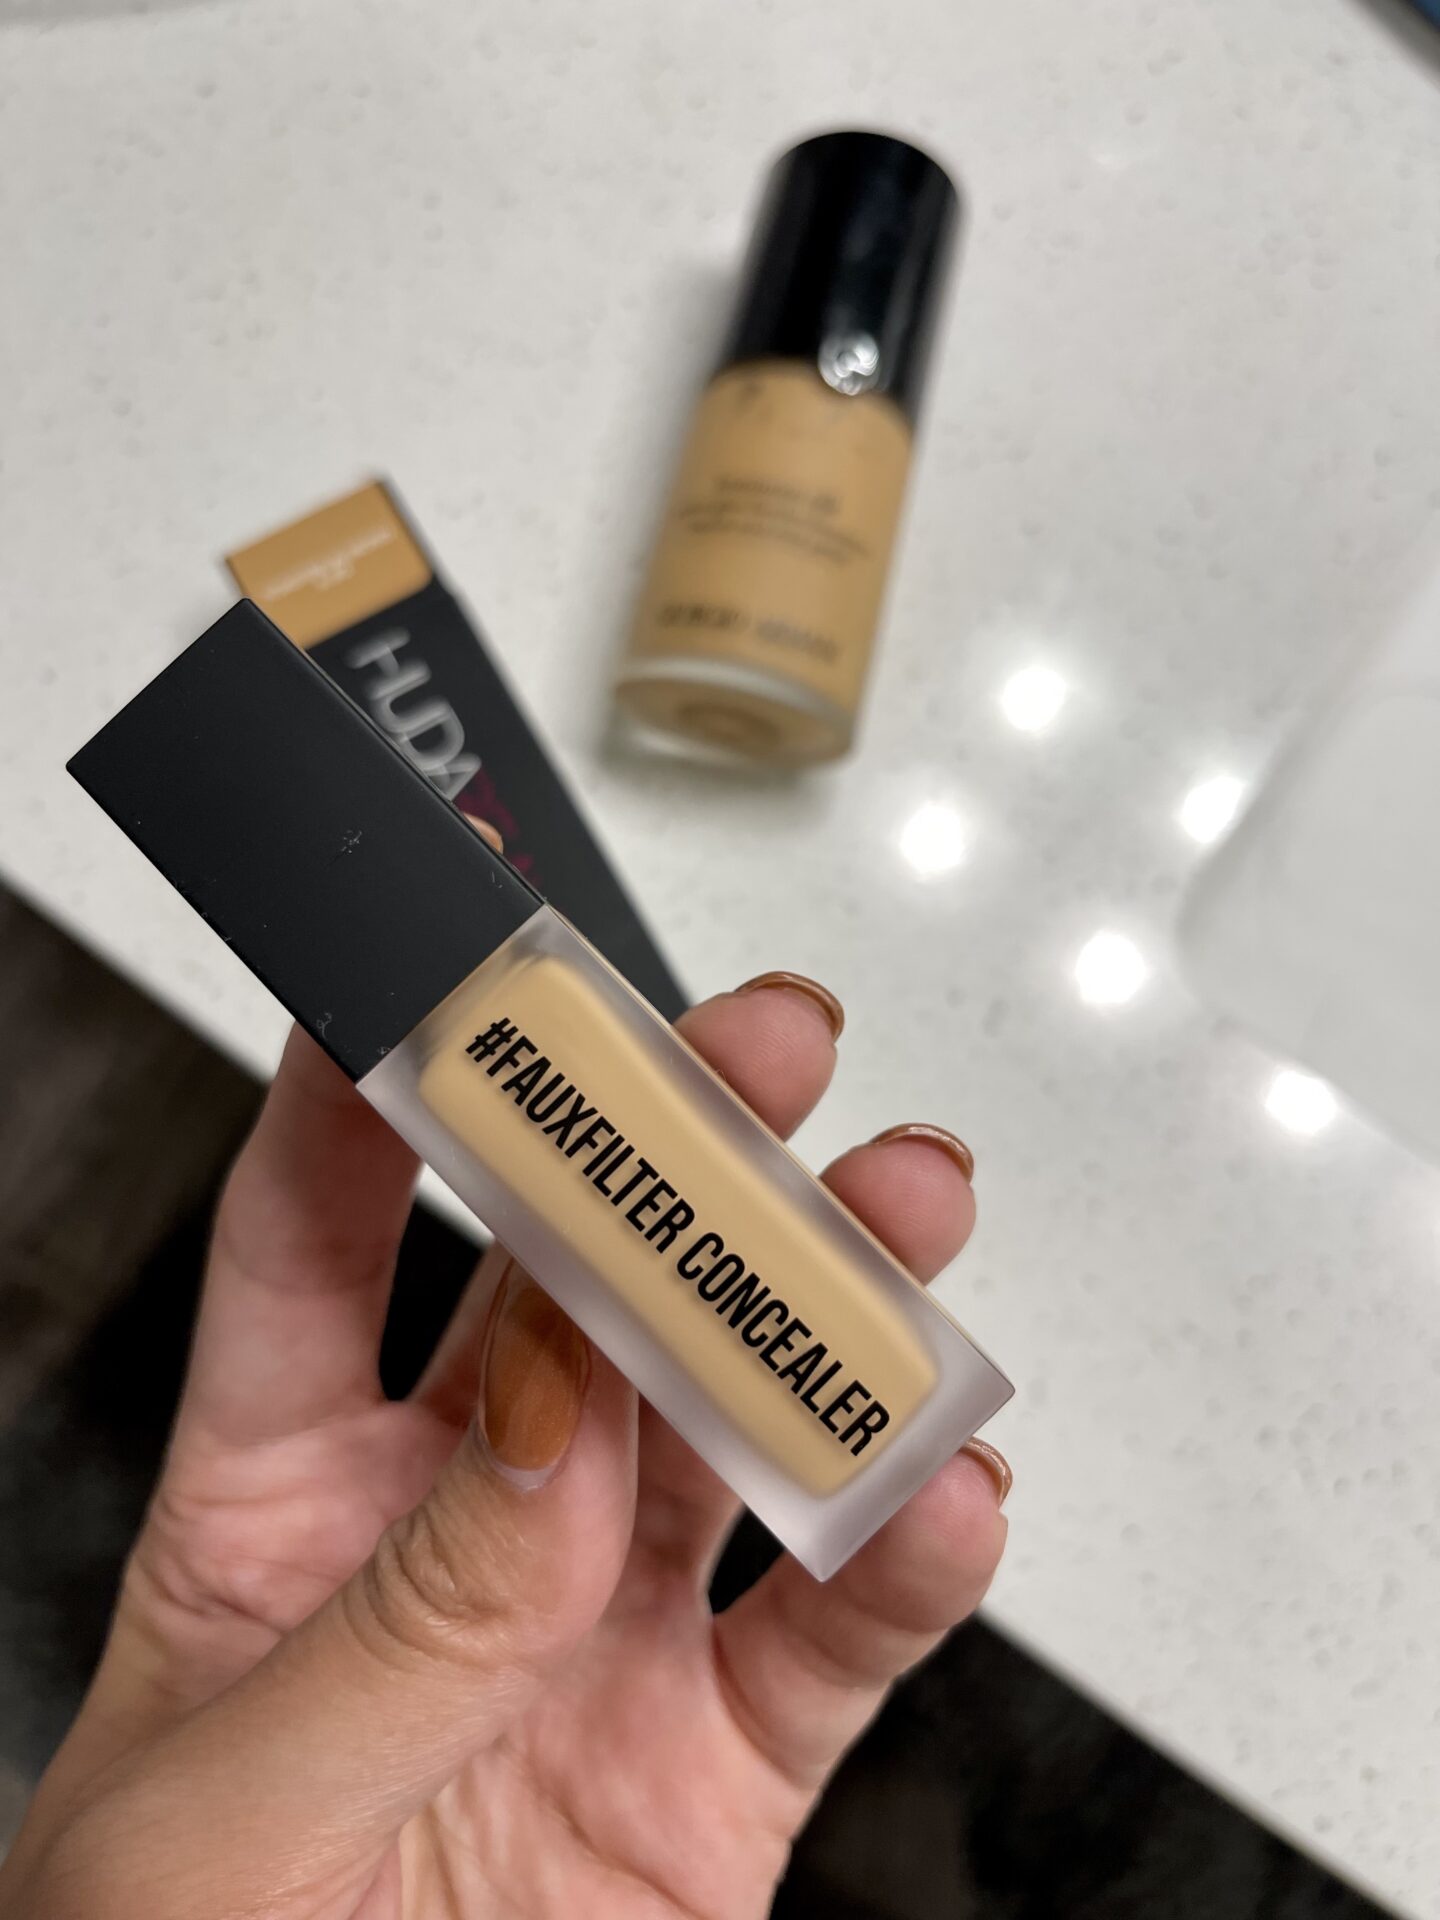 Sephora #fauxfilter concealer review